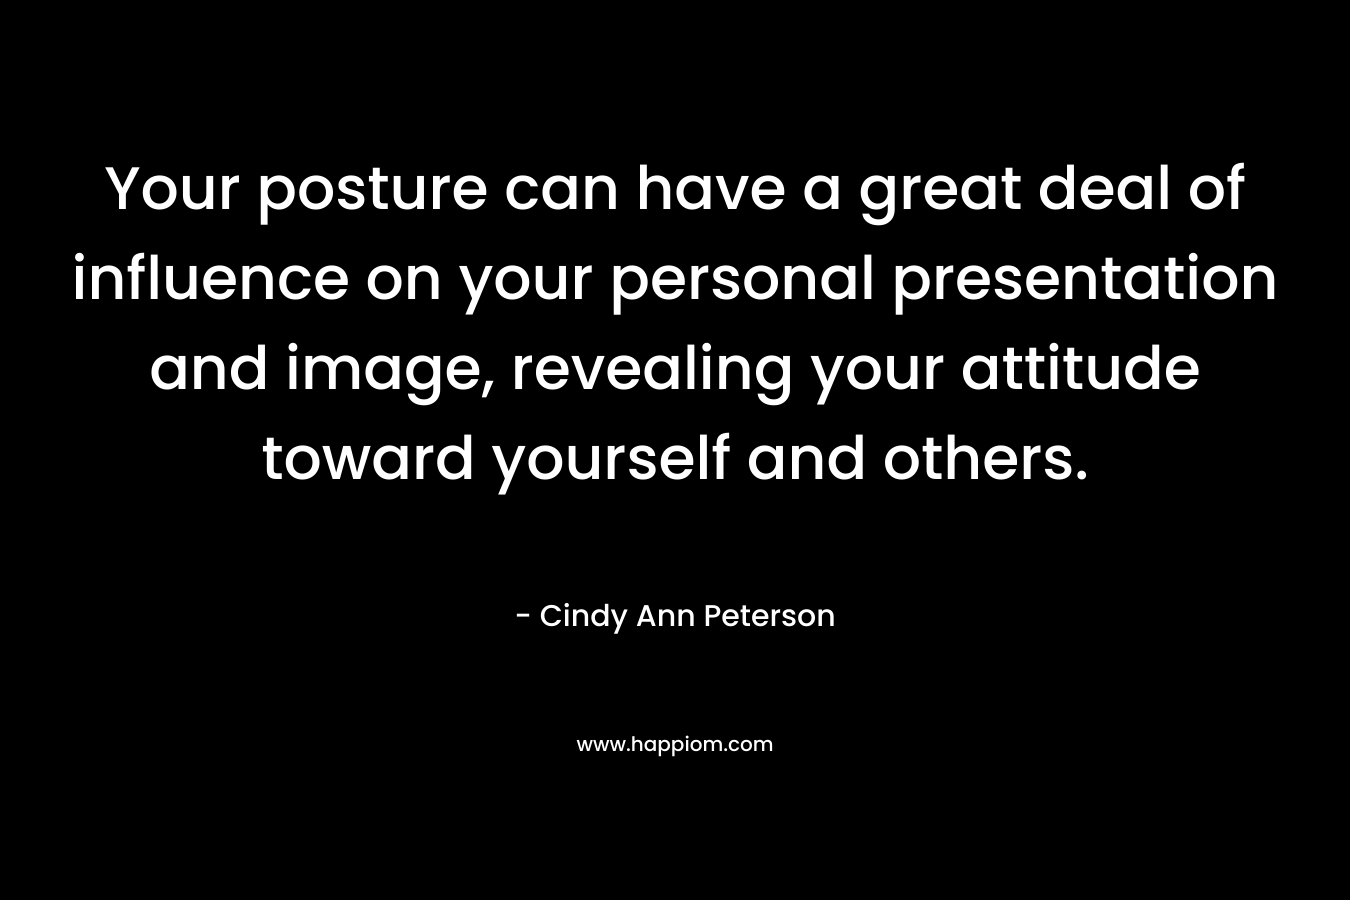 Your posture can have a great deal of influence on your personal presentation and image, revealing your attitude toward yourself and others.